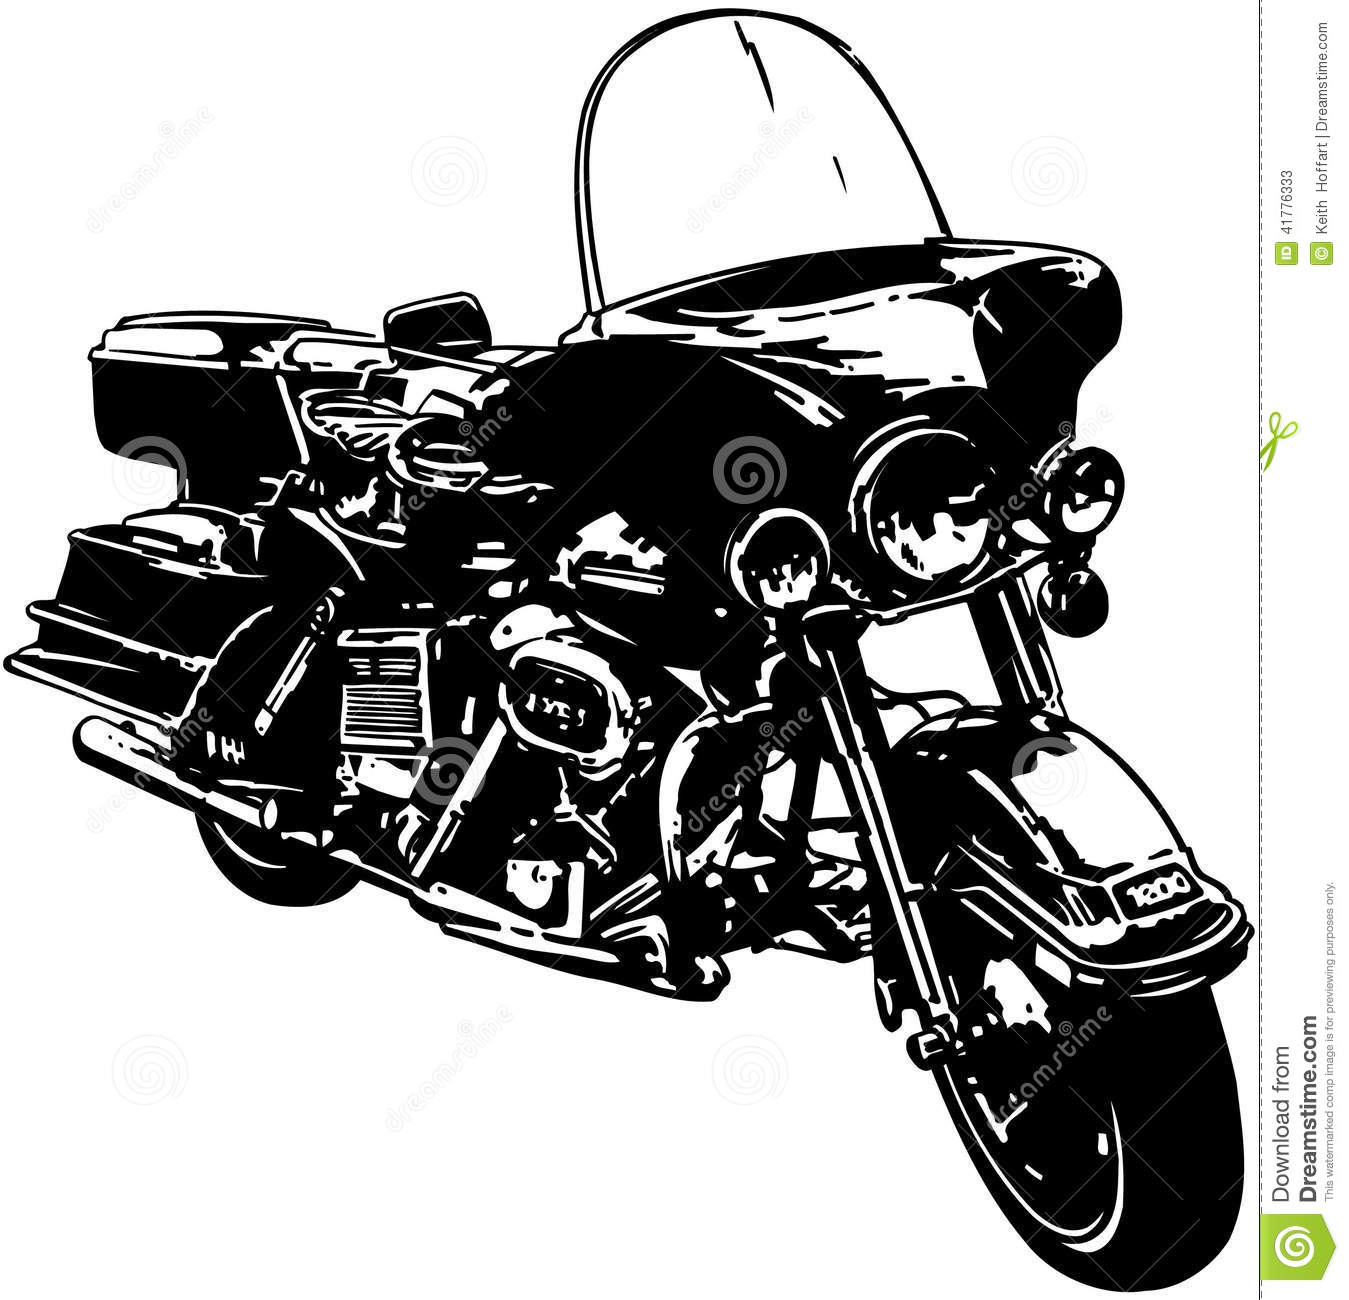 Christian Motorcycle Clip Art